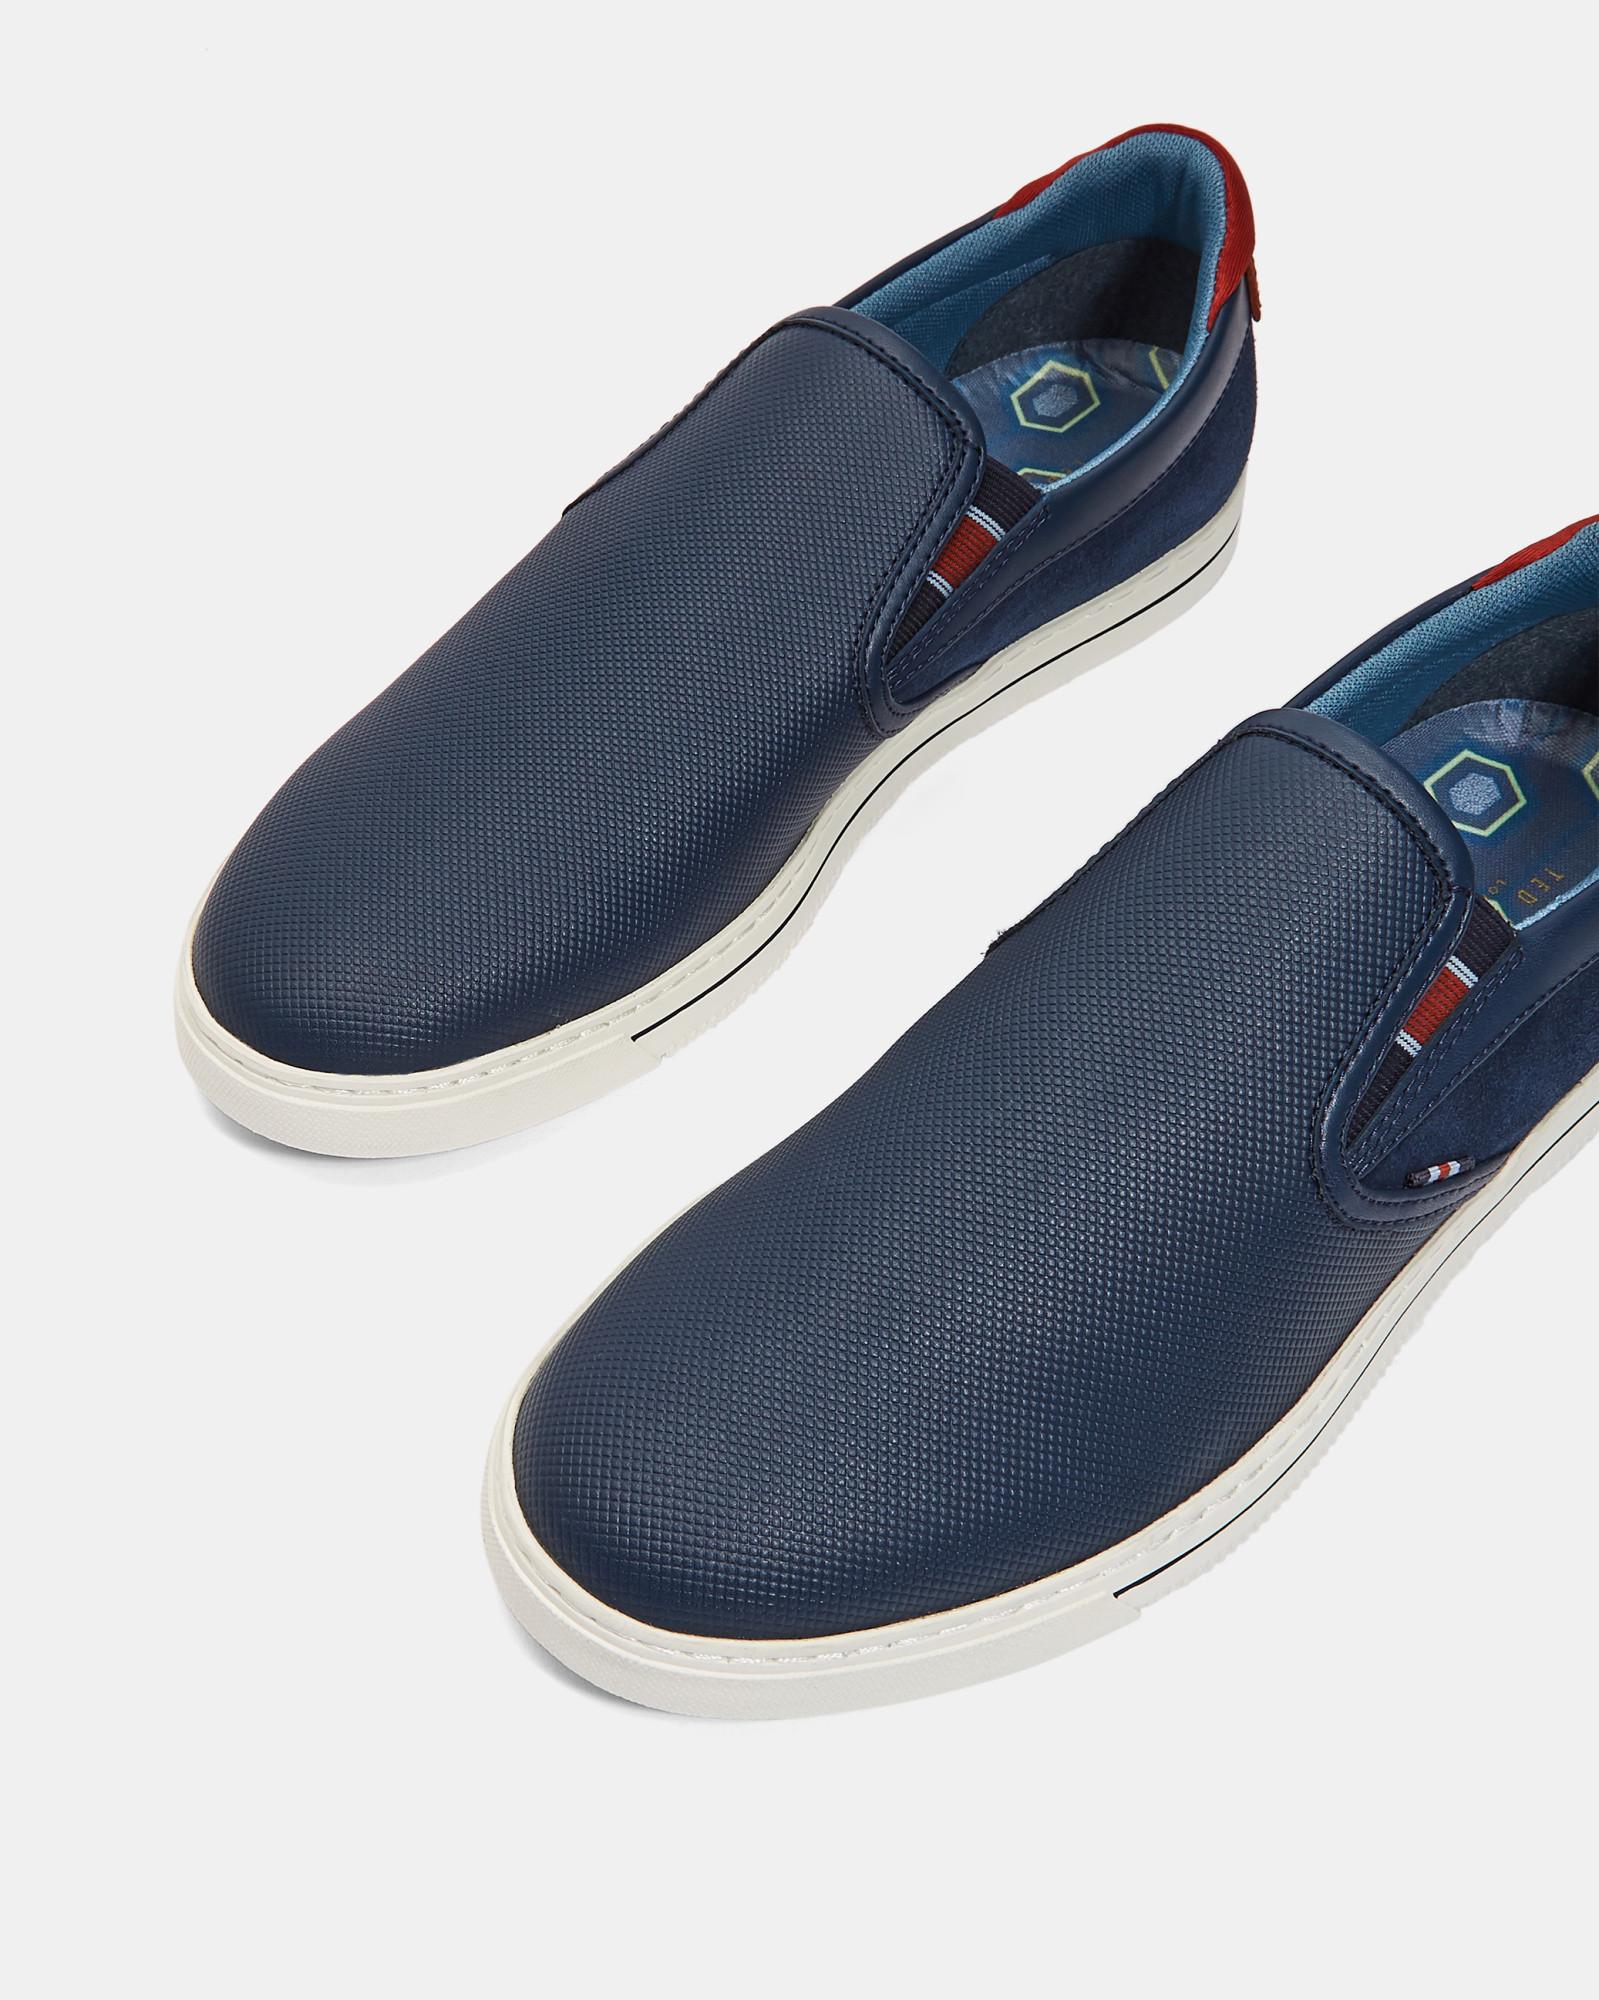 navy blue slip on trainers